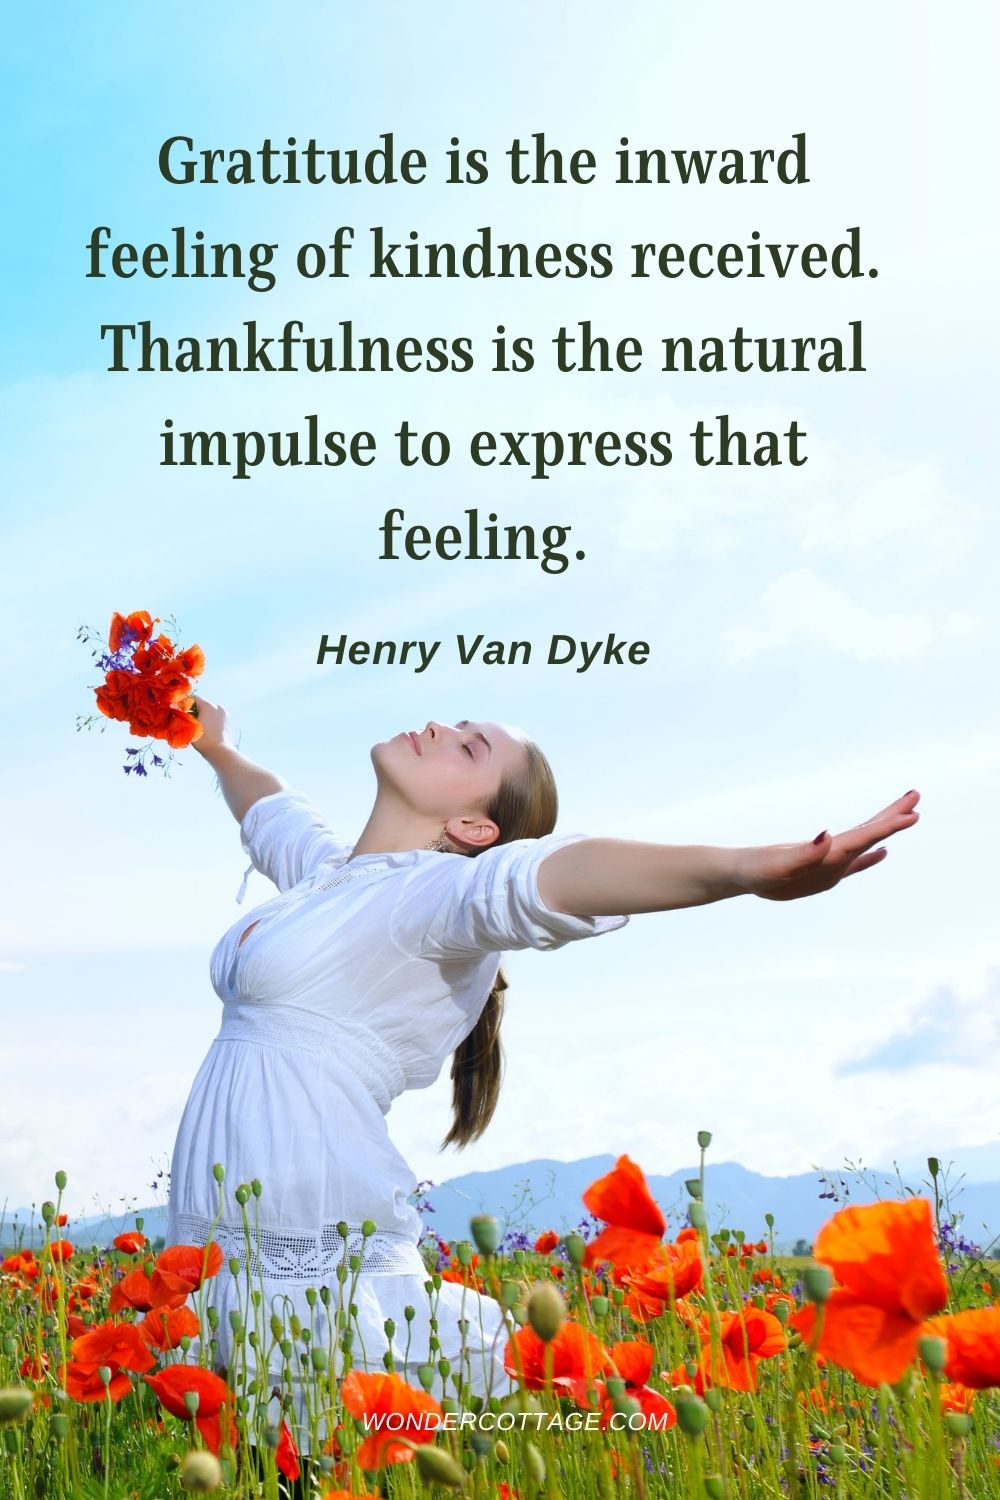 Gratitude is the inward feeling of kindness received. Thankfulness is the natural impulse to express that feeling. Henry Van Dyke - Thanksgiving Quotes With Images